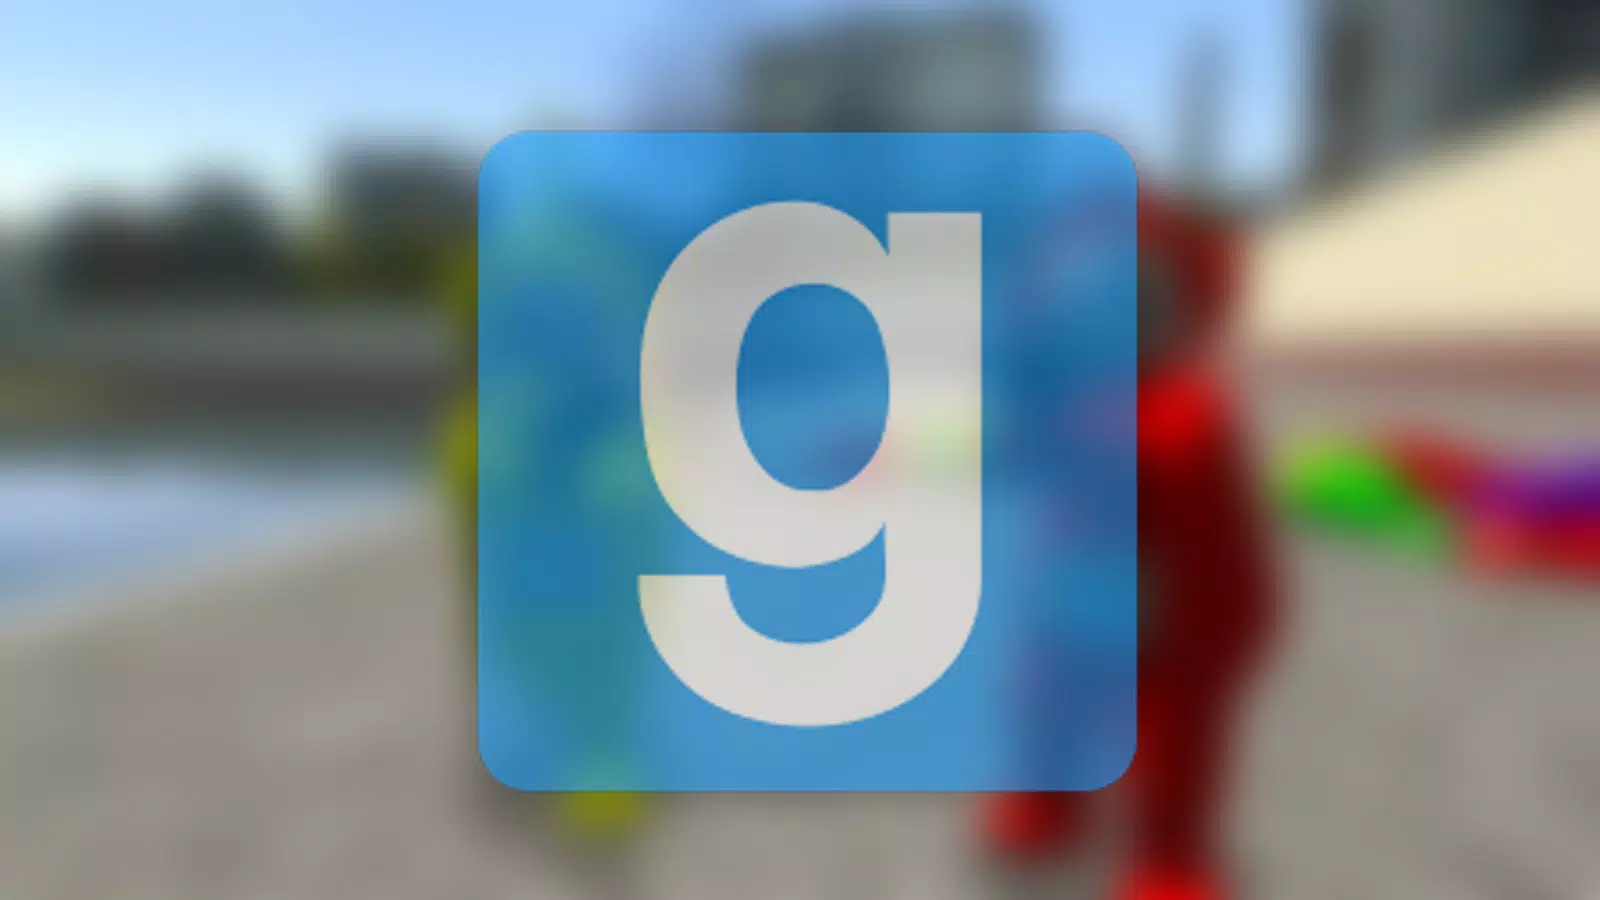 About: Free Gmod Games (Google Play version)